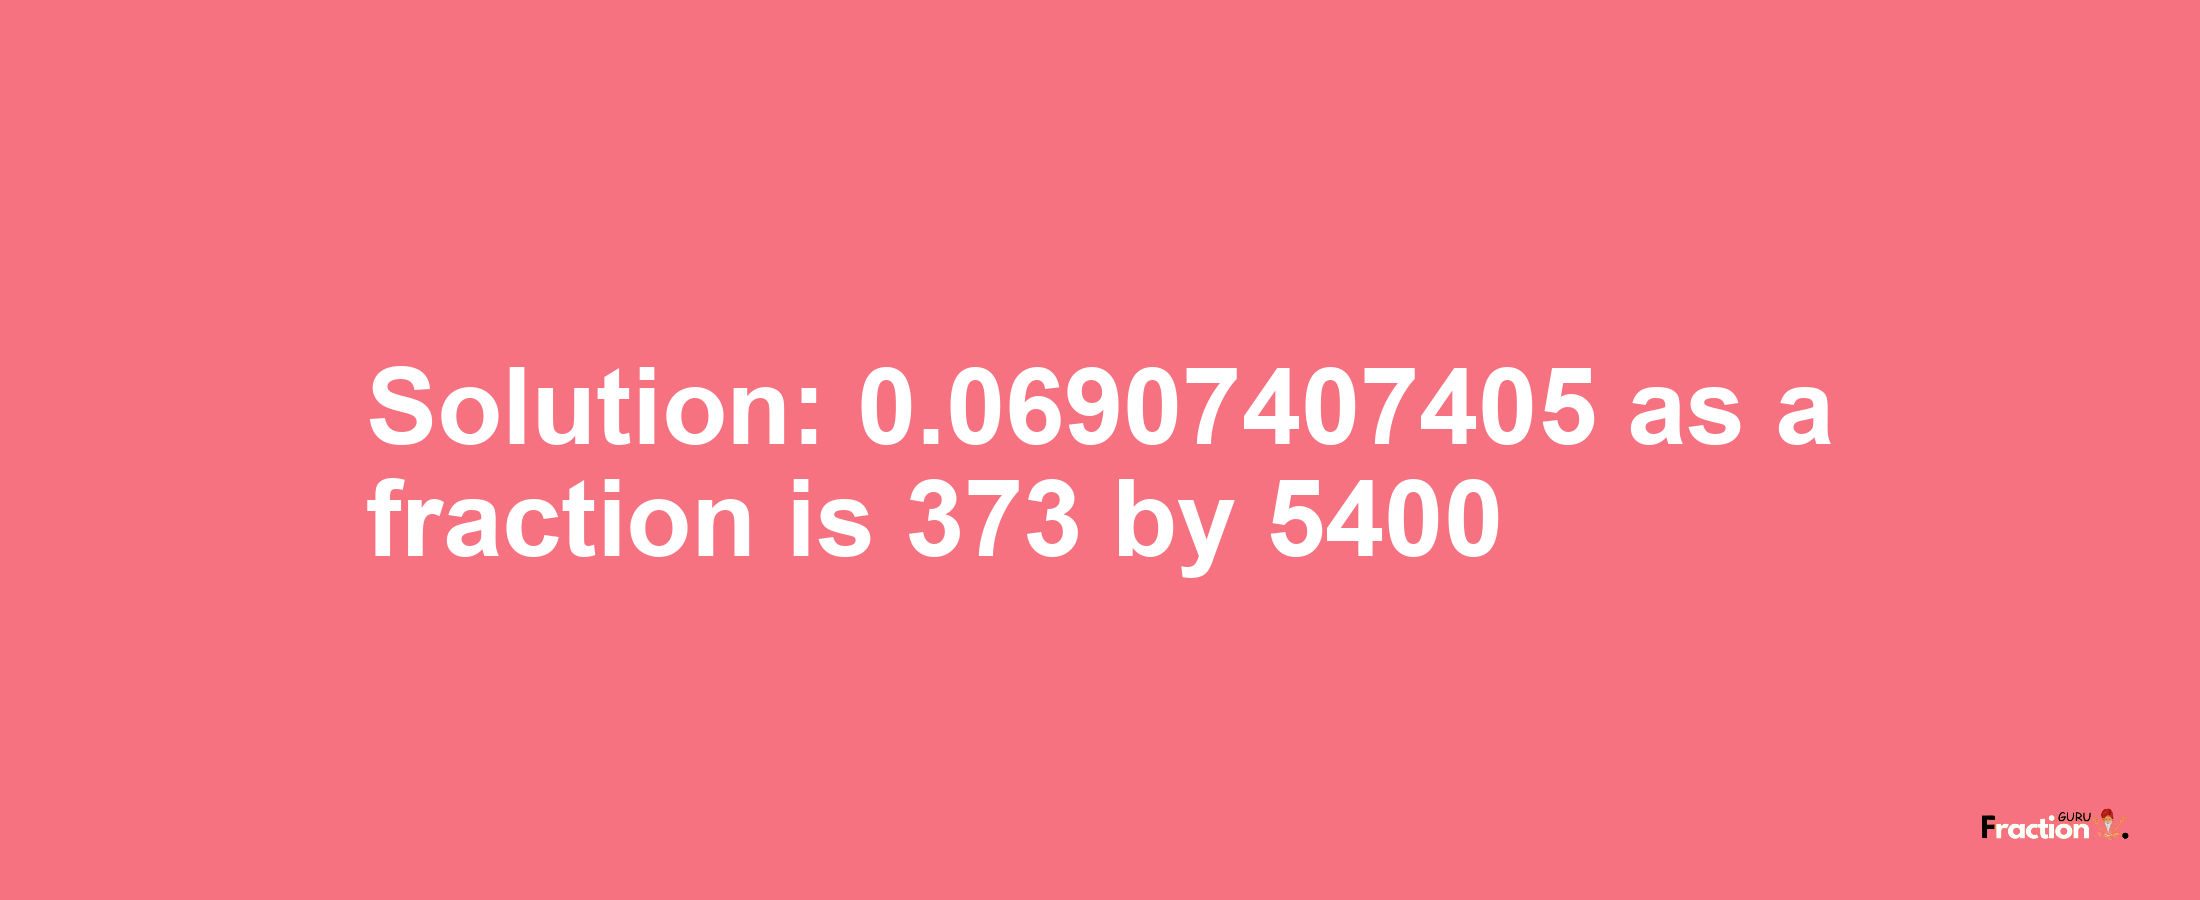 Solution:0.06907407405 as a fraction is 373/5400